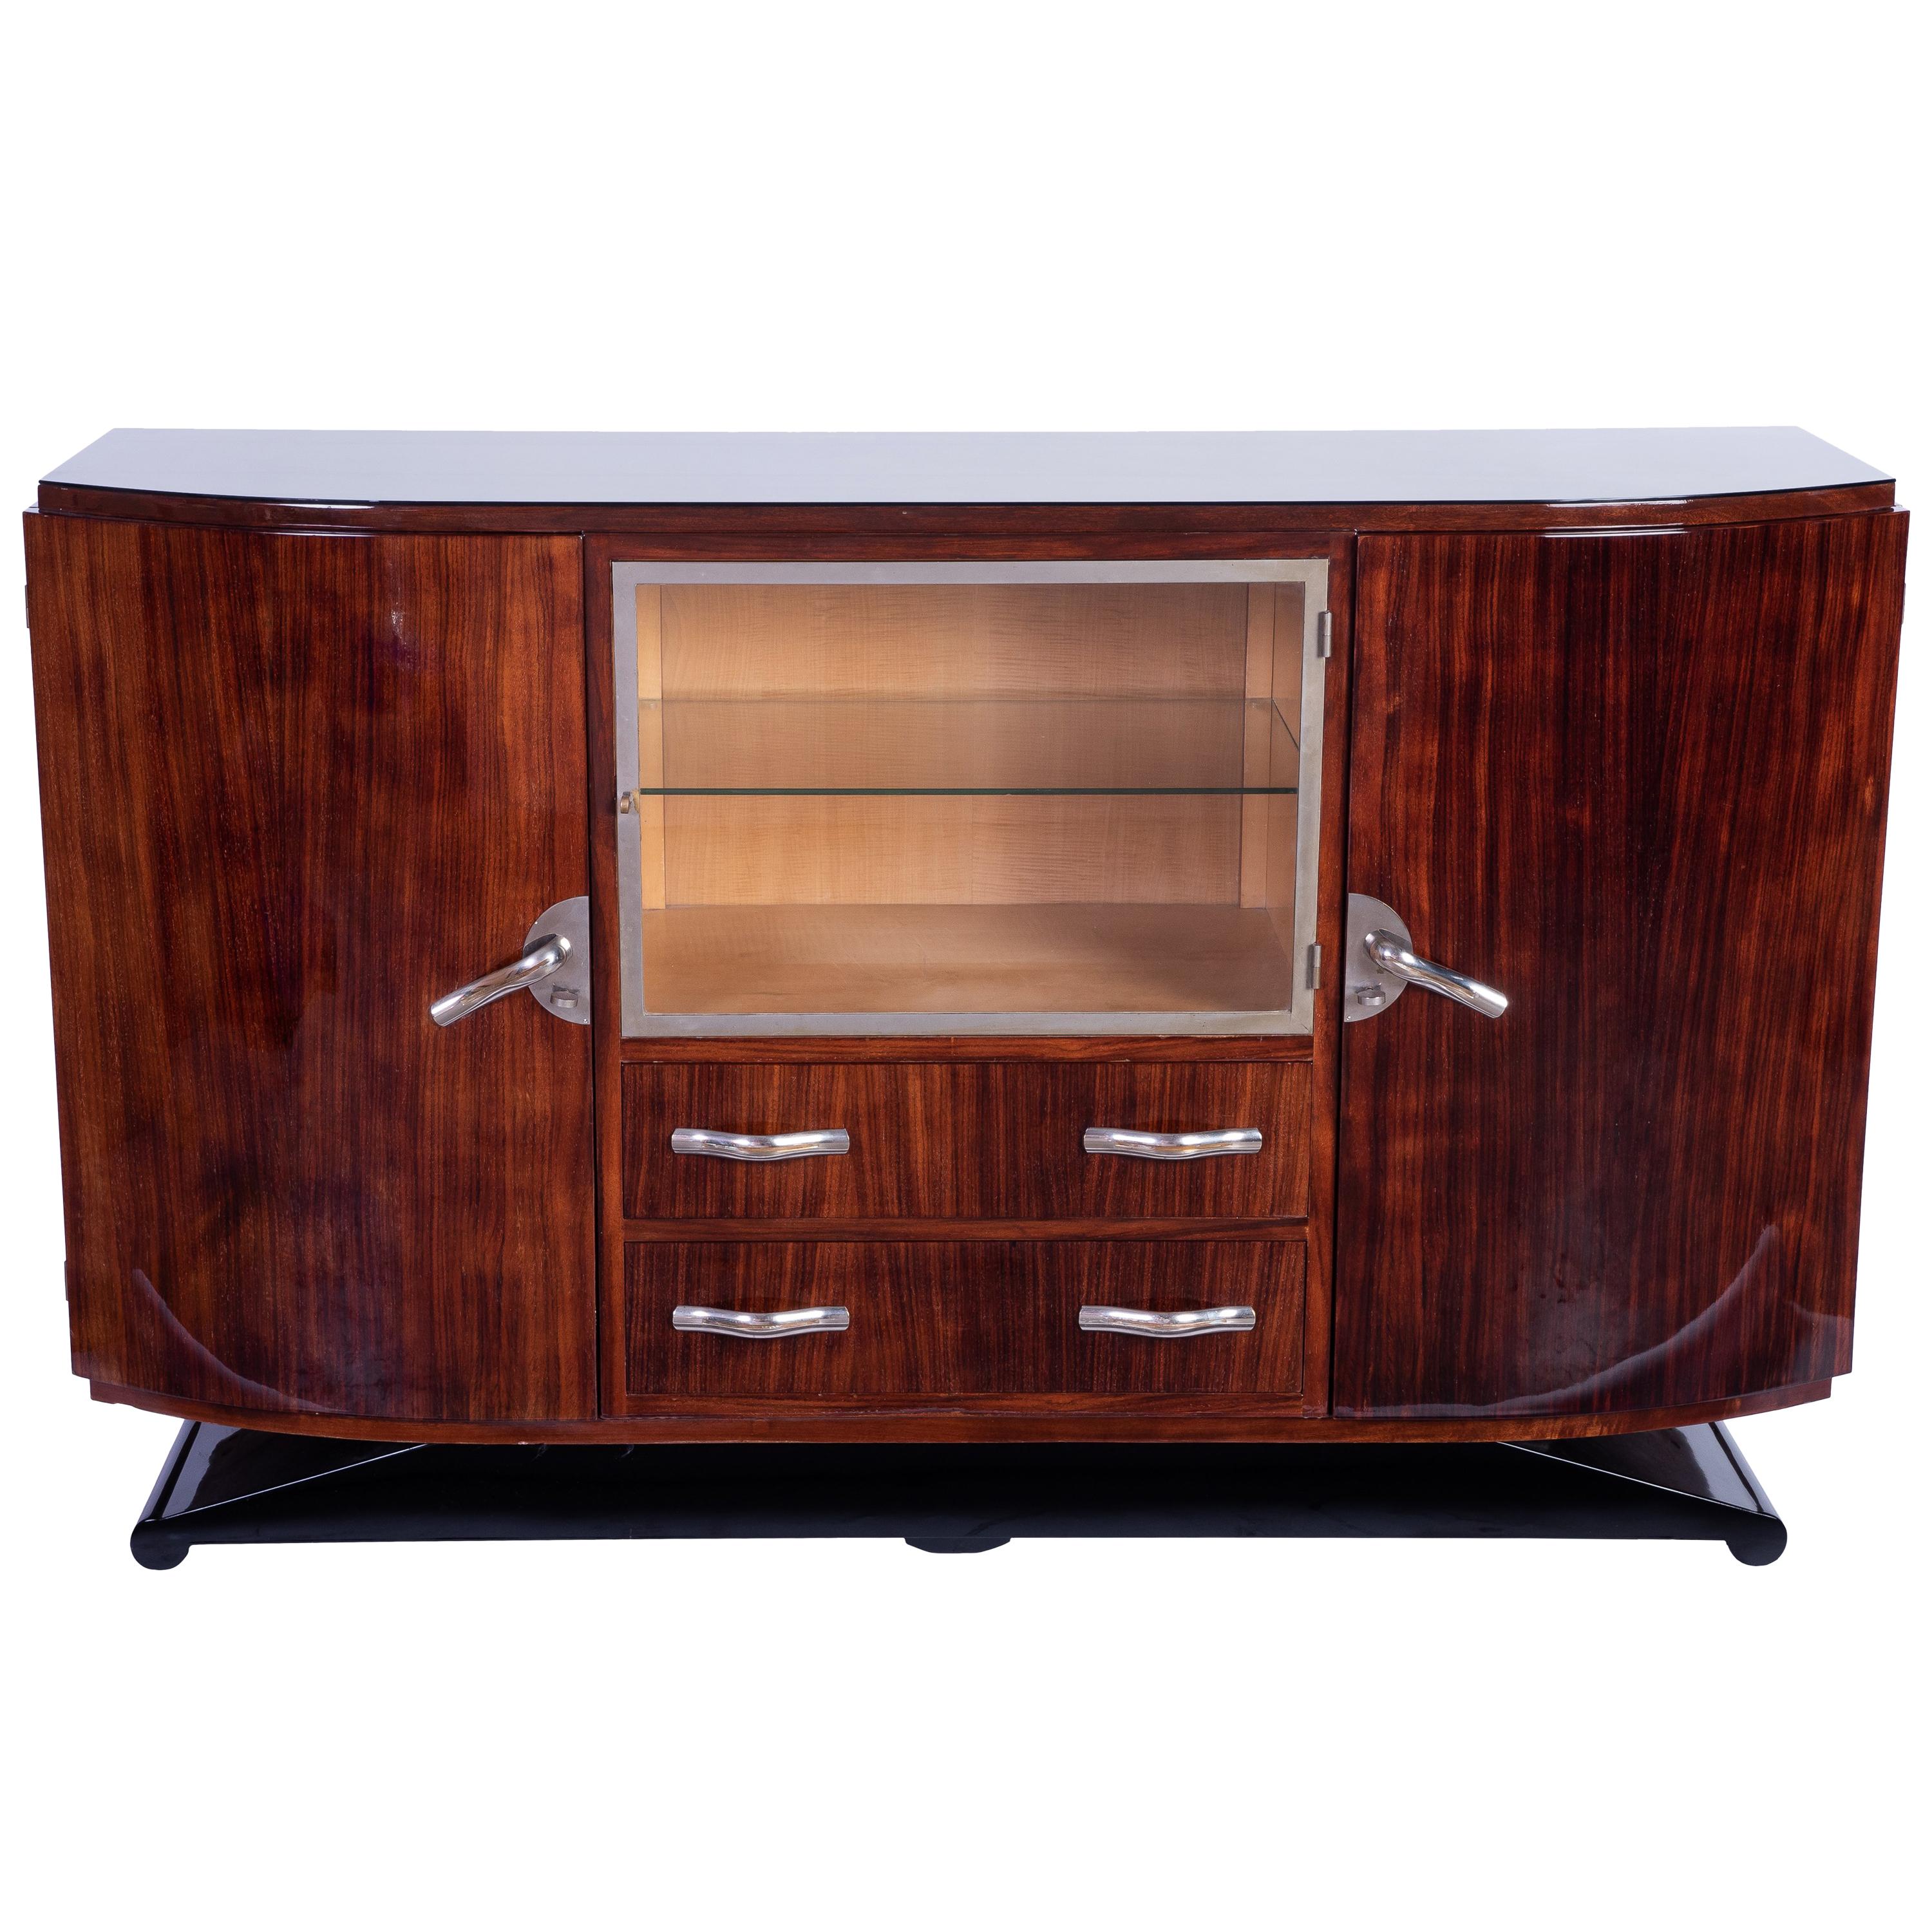 Luxe Art Deco Sideboard Credenza Showcase in Walnut For Sale